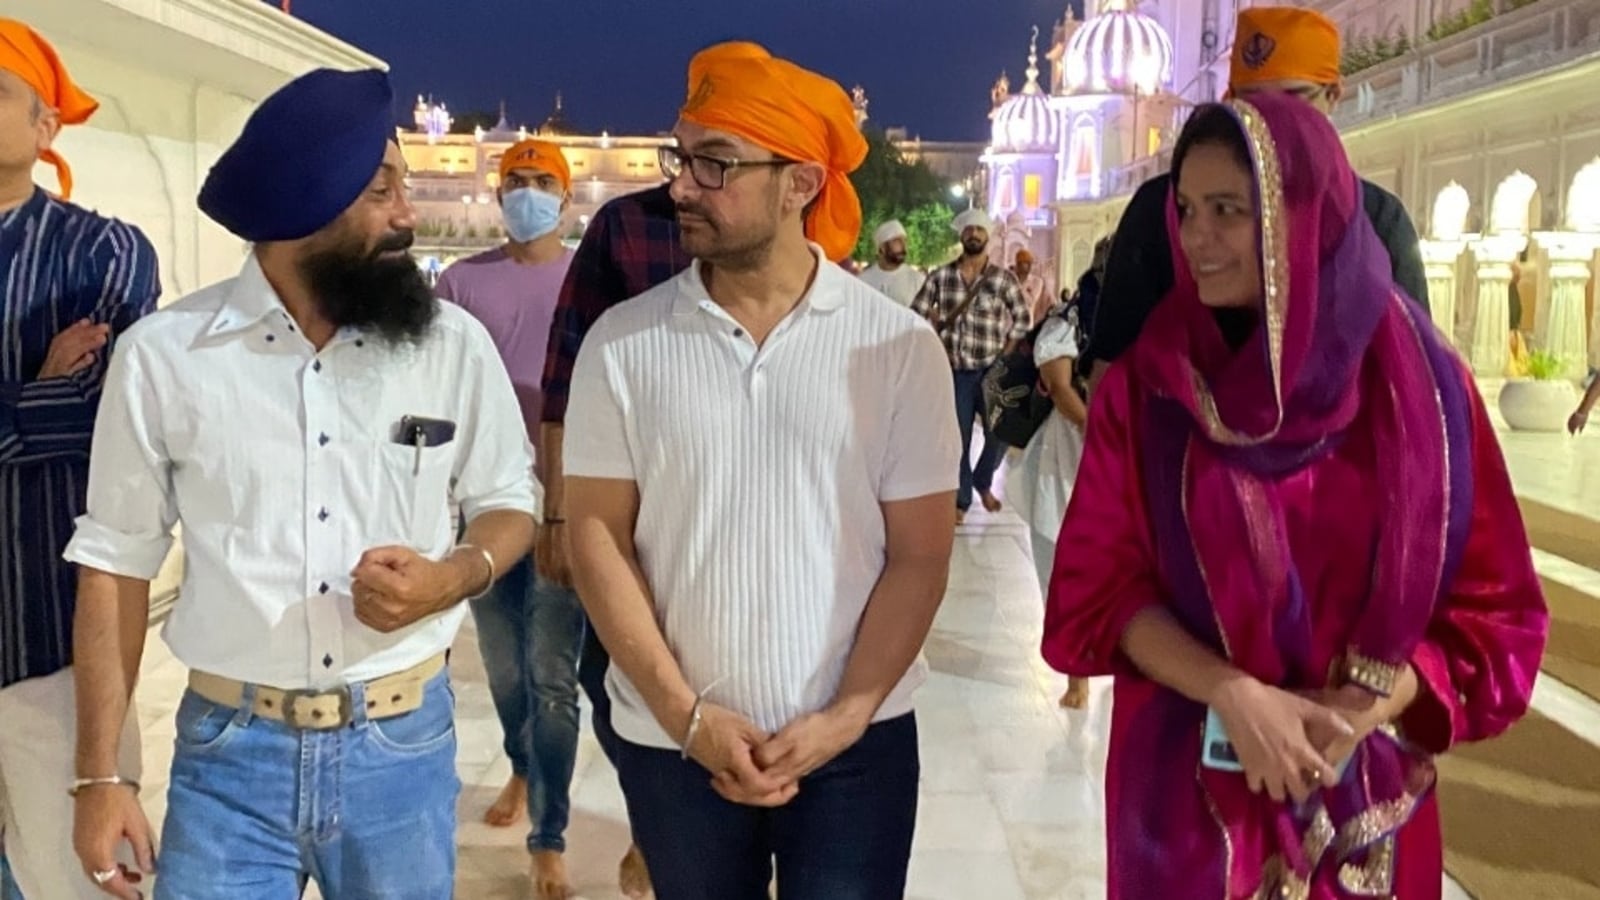 Laal Singh Chaddha: Aamir Khan's Look Gets Approval From Gurdwara Body SGPC  - News18